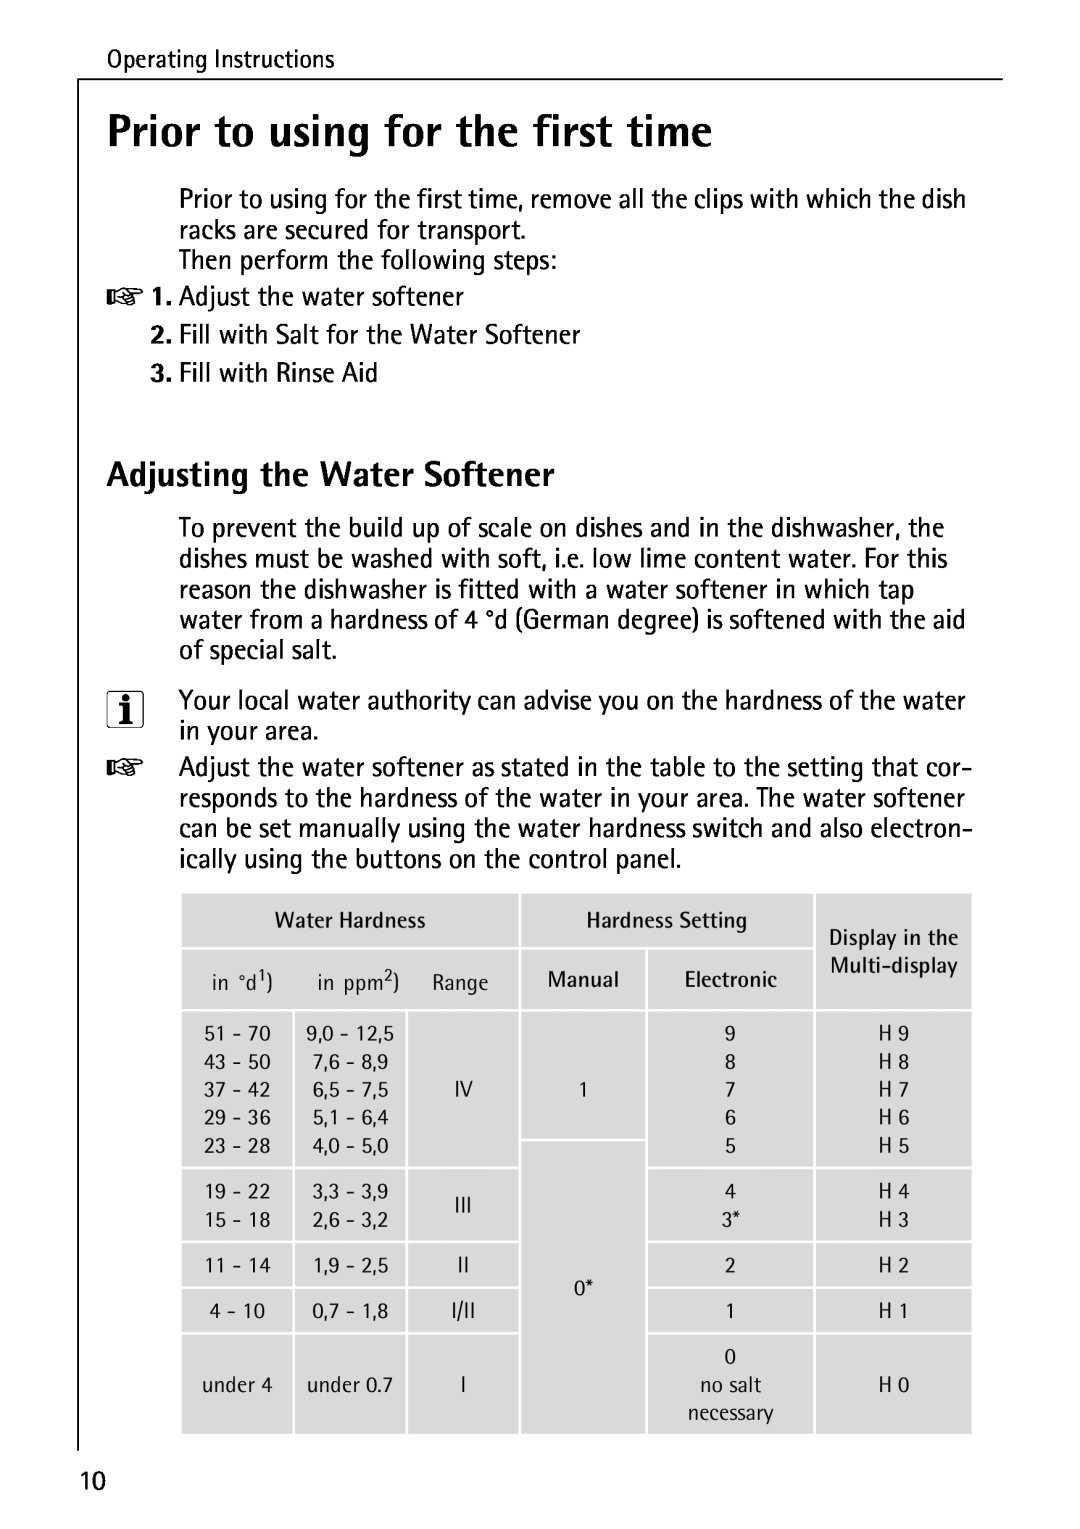 AEG 3A manual Prior to using for the first time, Adjusting the Water Softener 